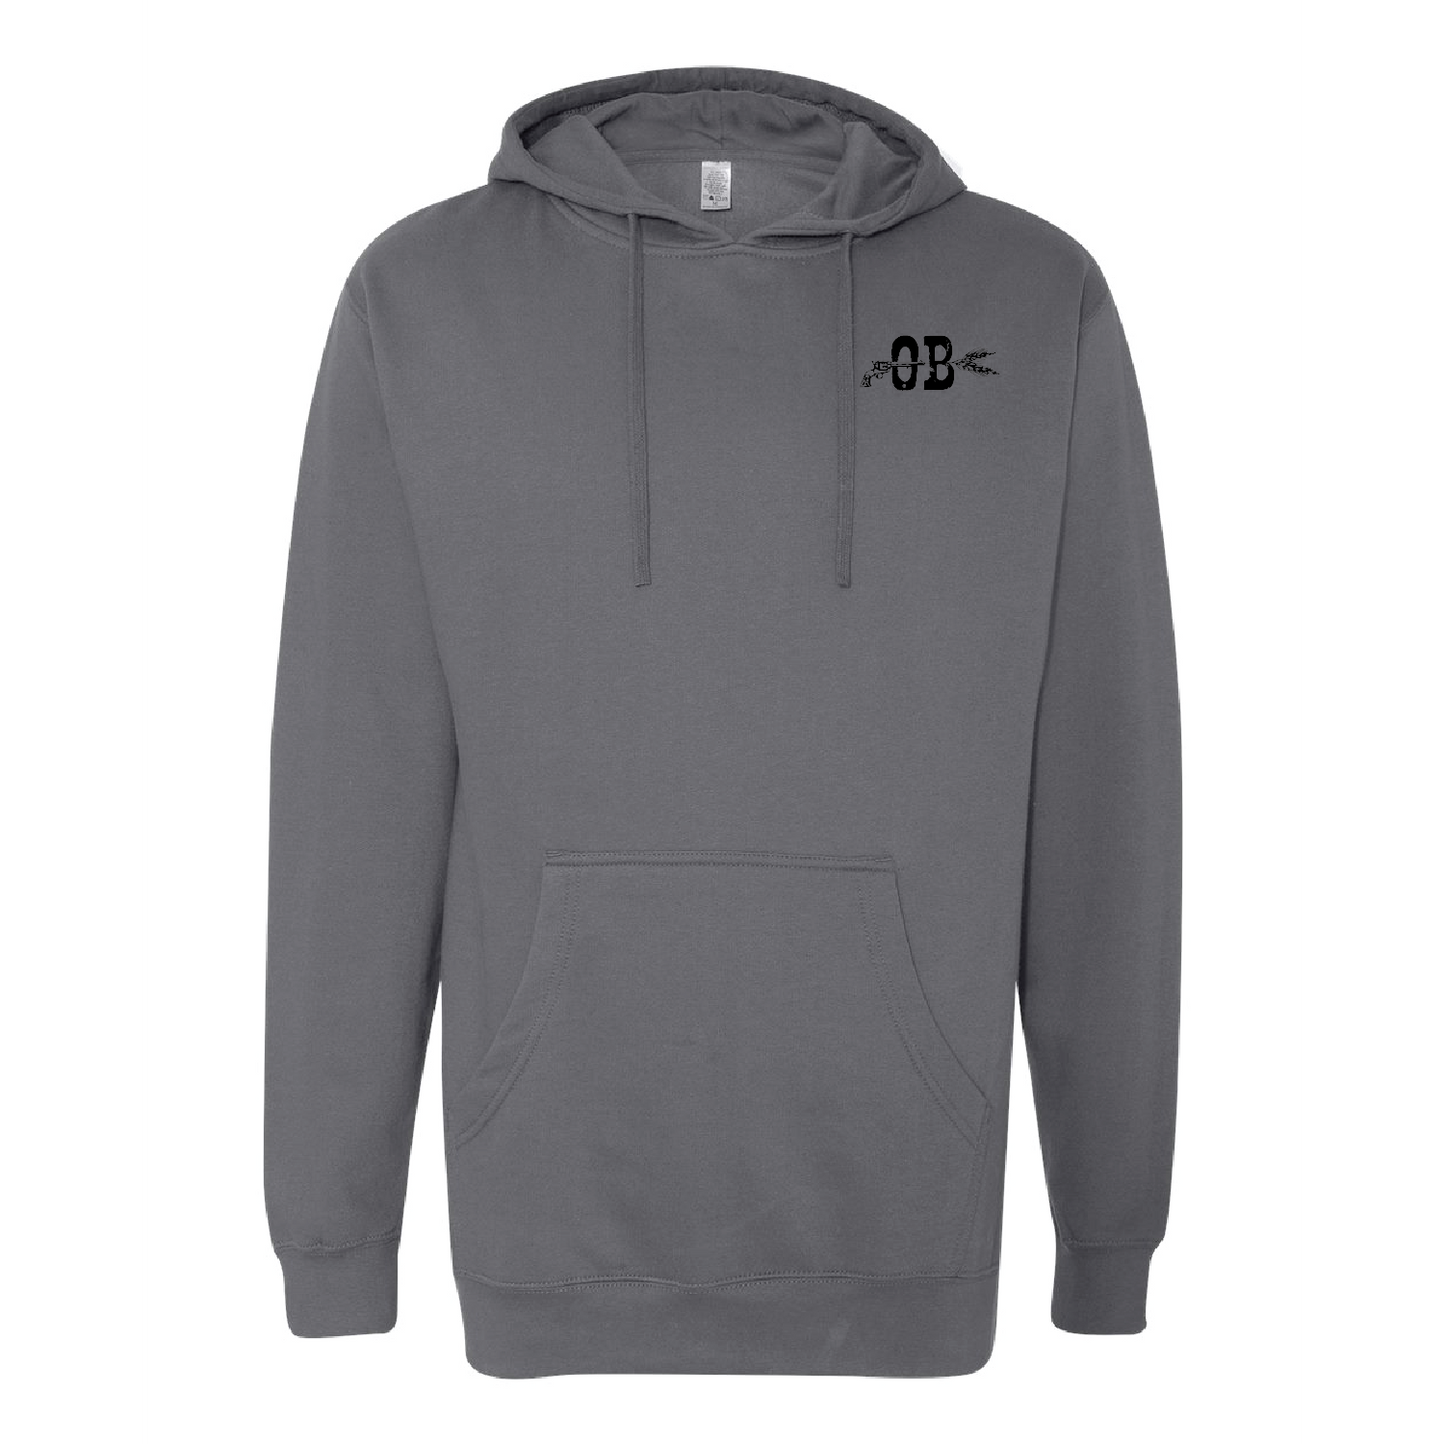 Outlaw Brewing Unisex Midweight Hooded Sweatshirt 3